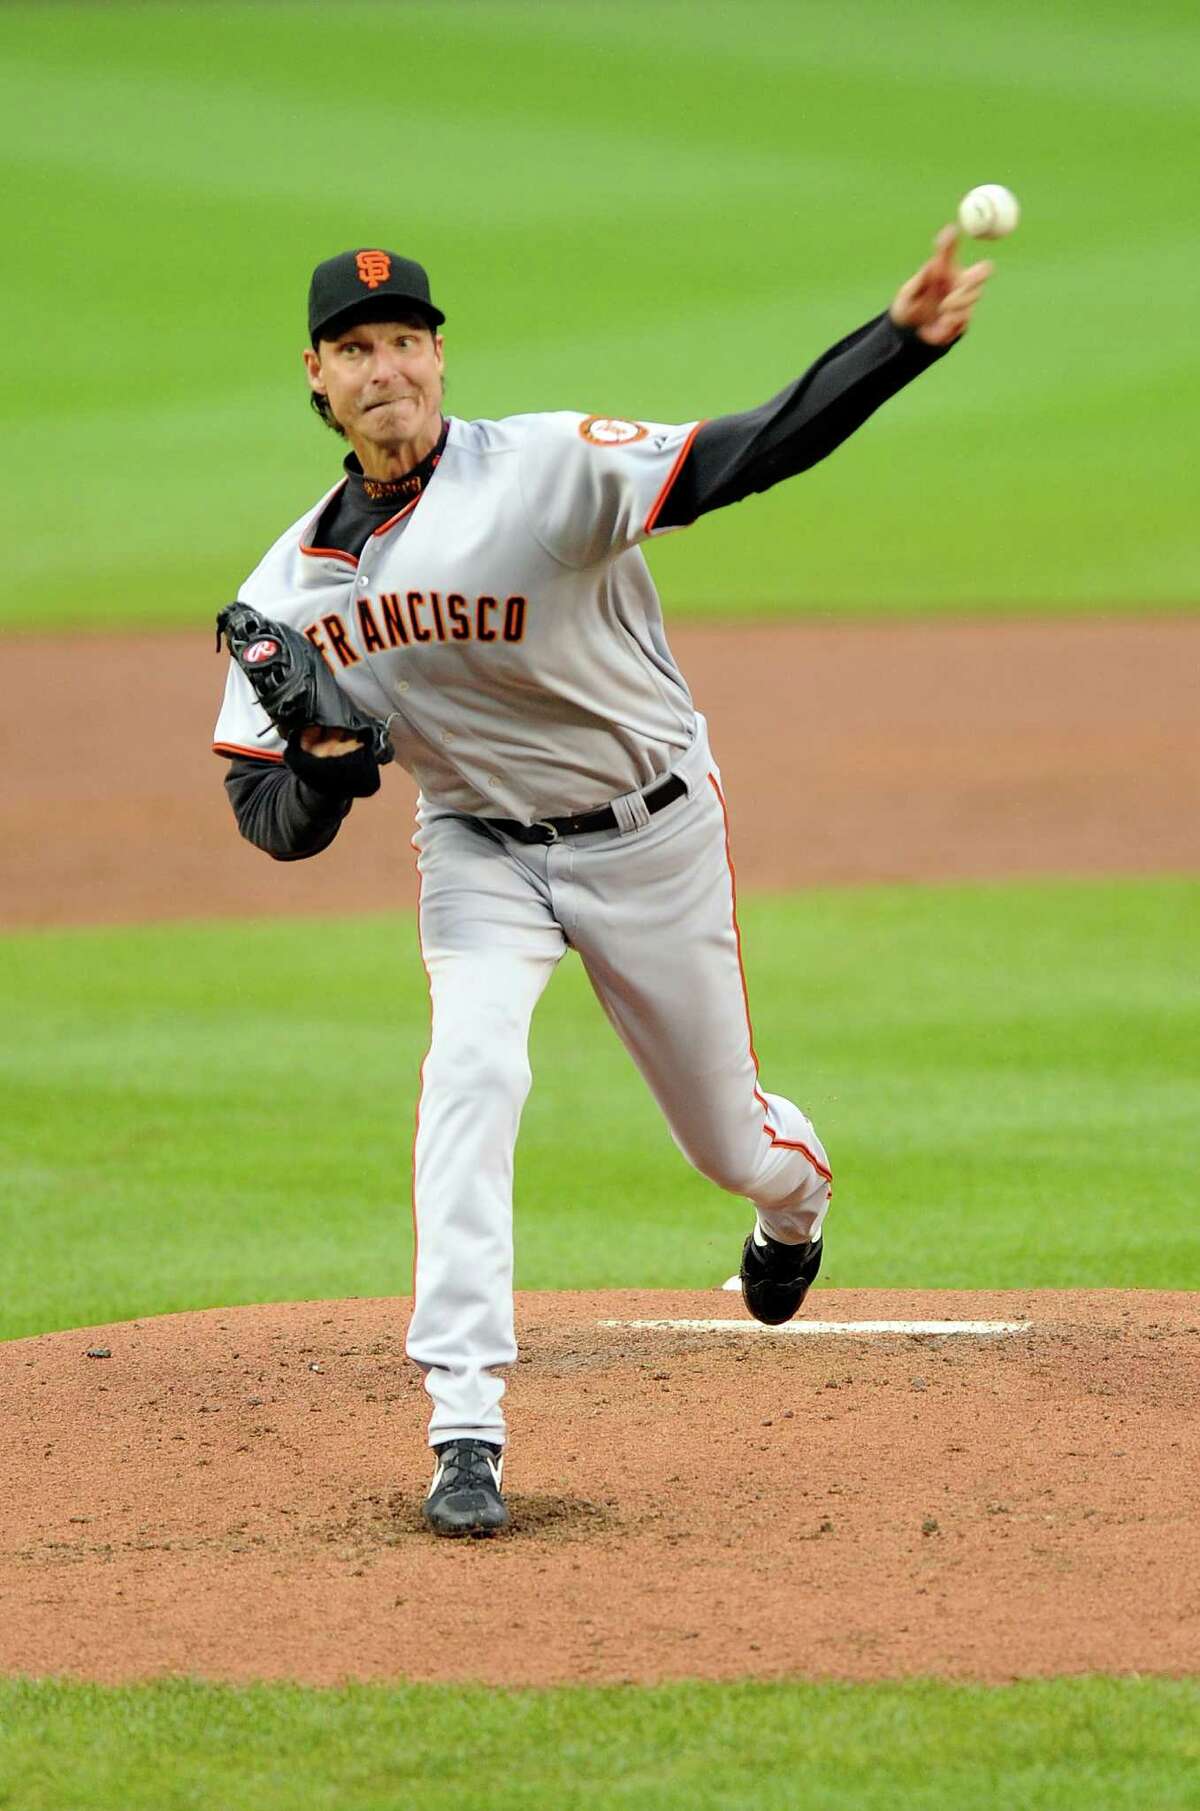 Bay Area native Randy Johnson recorded his 300th major-league win in Washington while pitching for the Giants on June 4, 2009.